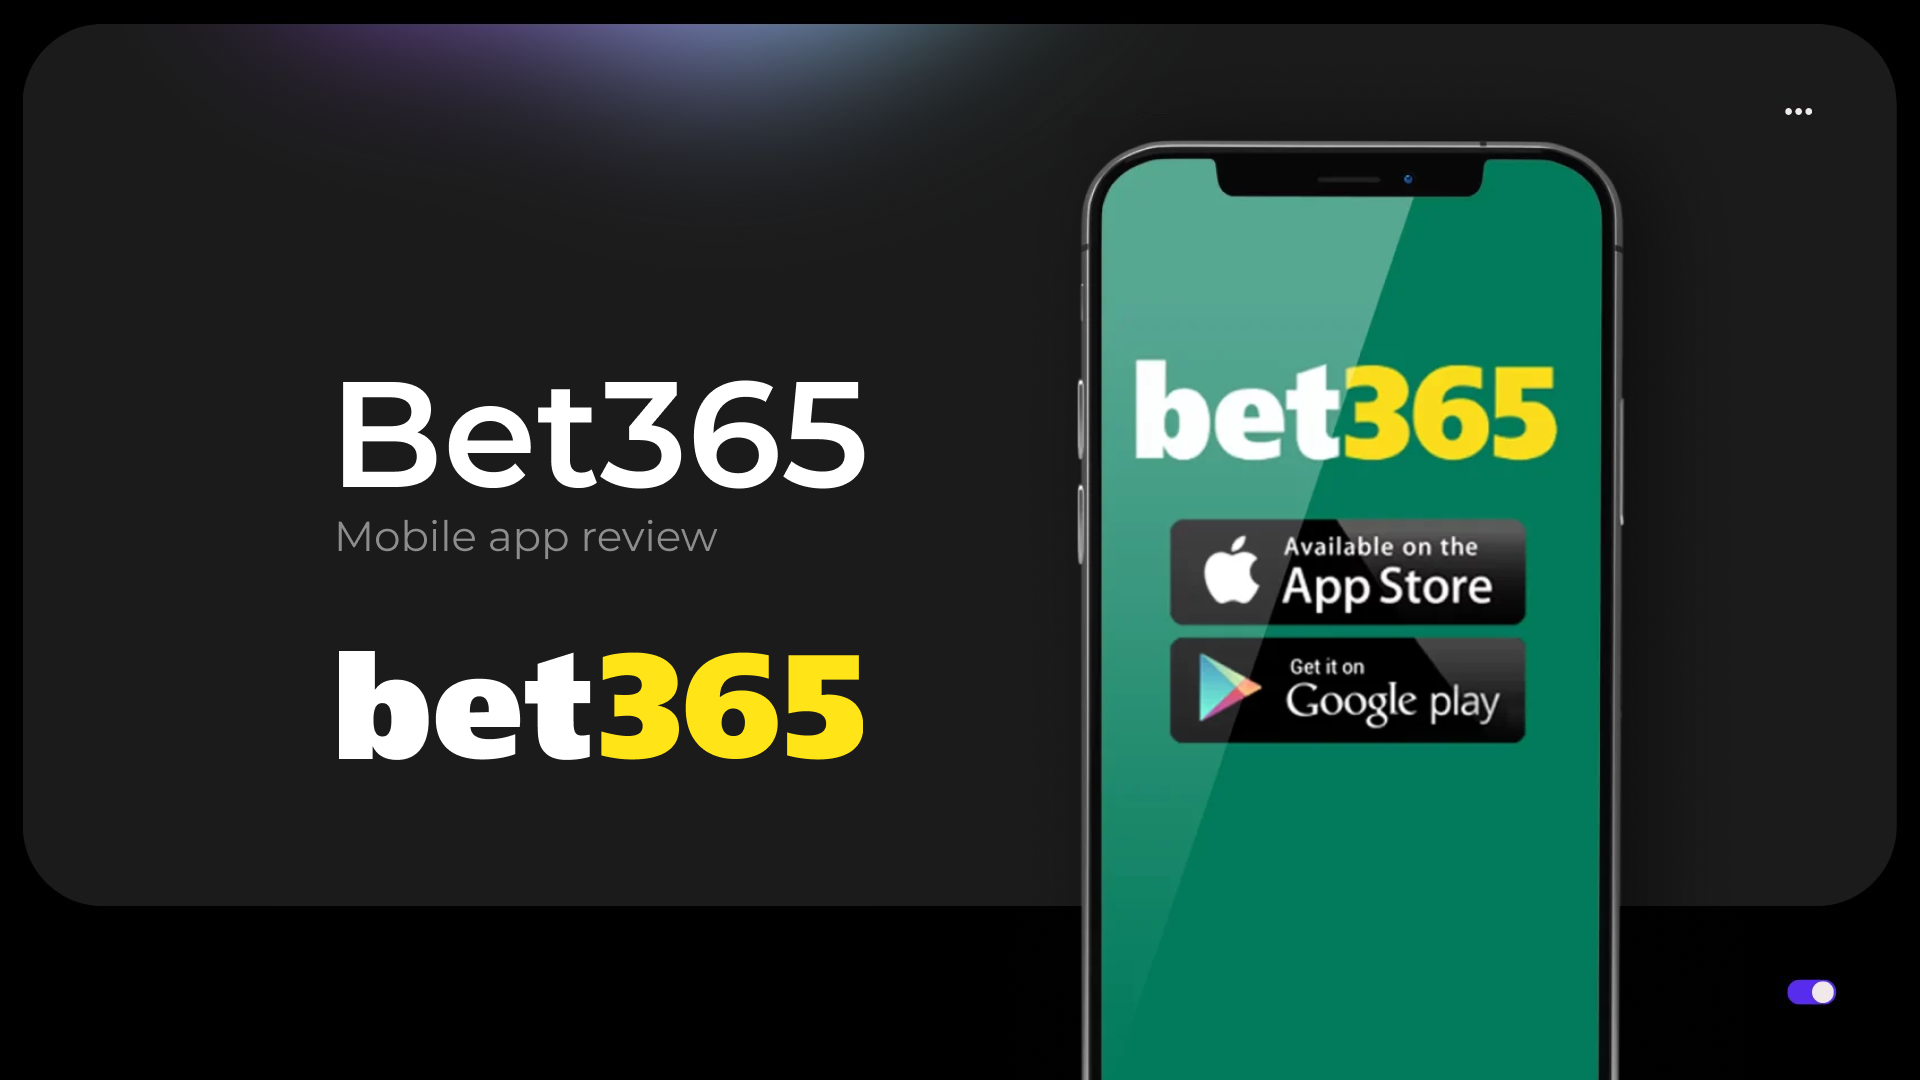 Bet365 India app for Android and iOS